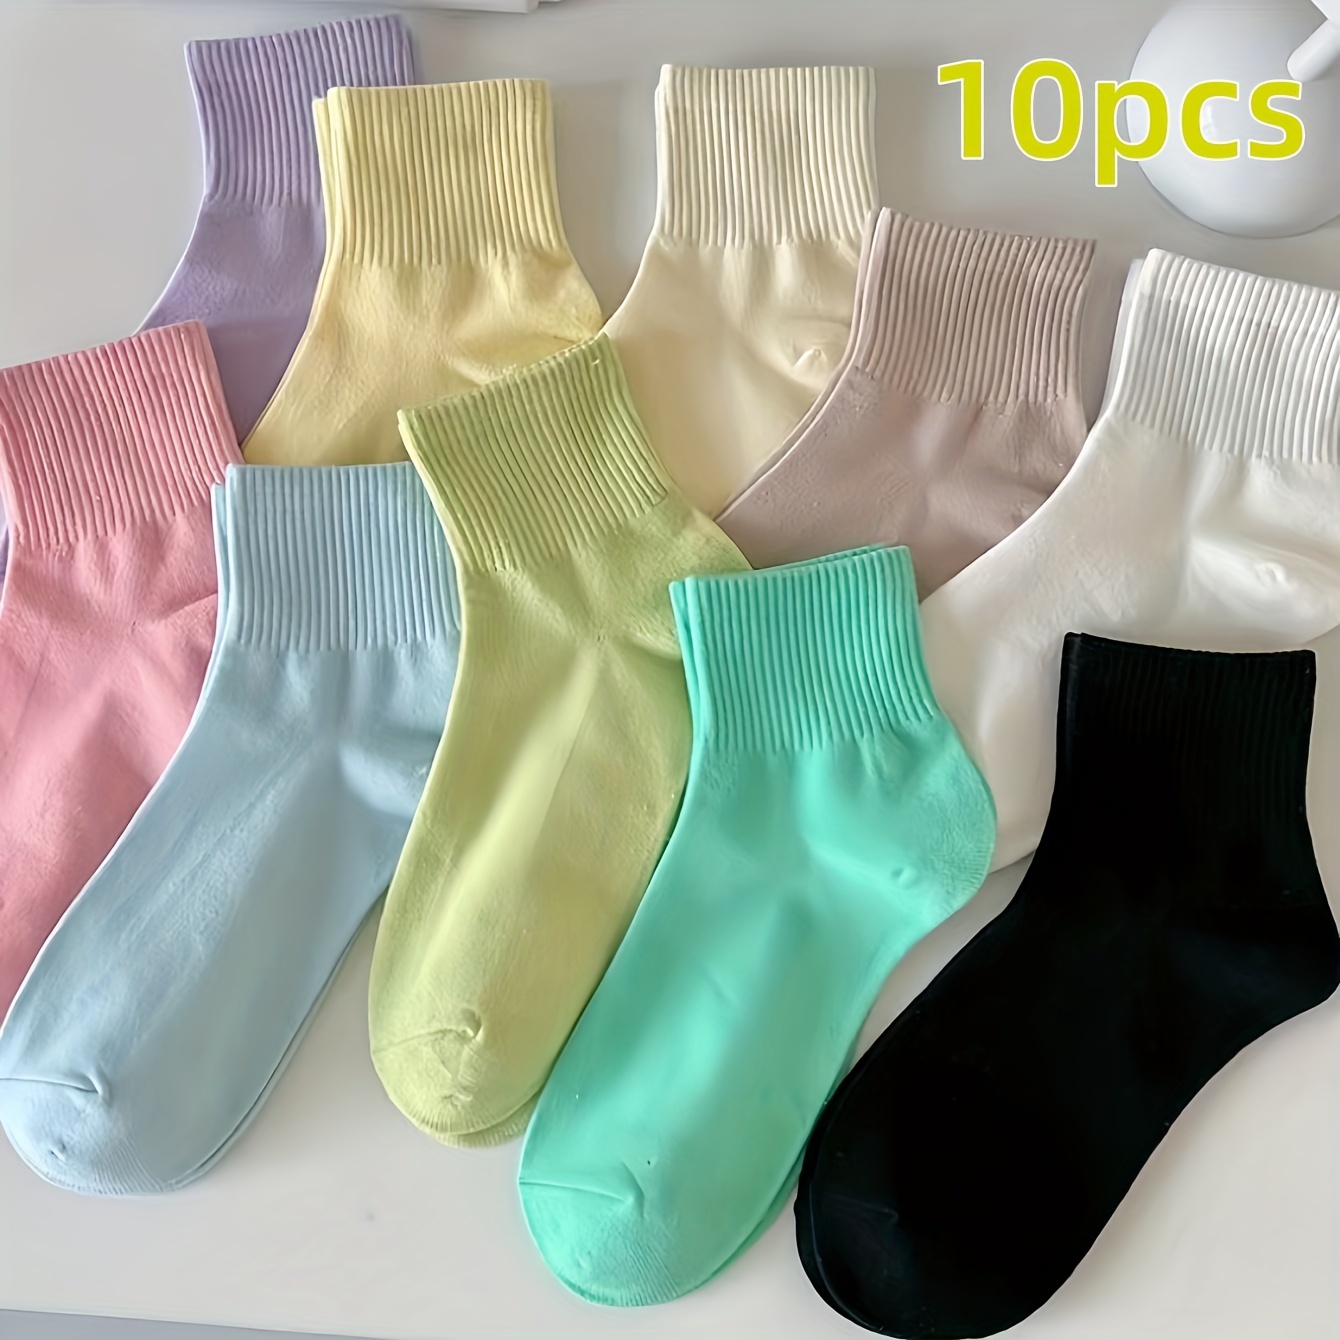 

10 Pairs Candy Colored Socks, Preppy & Breathable Short Socks, Women's Stockings & Hosiery